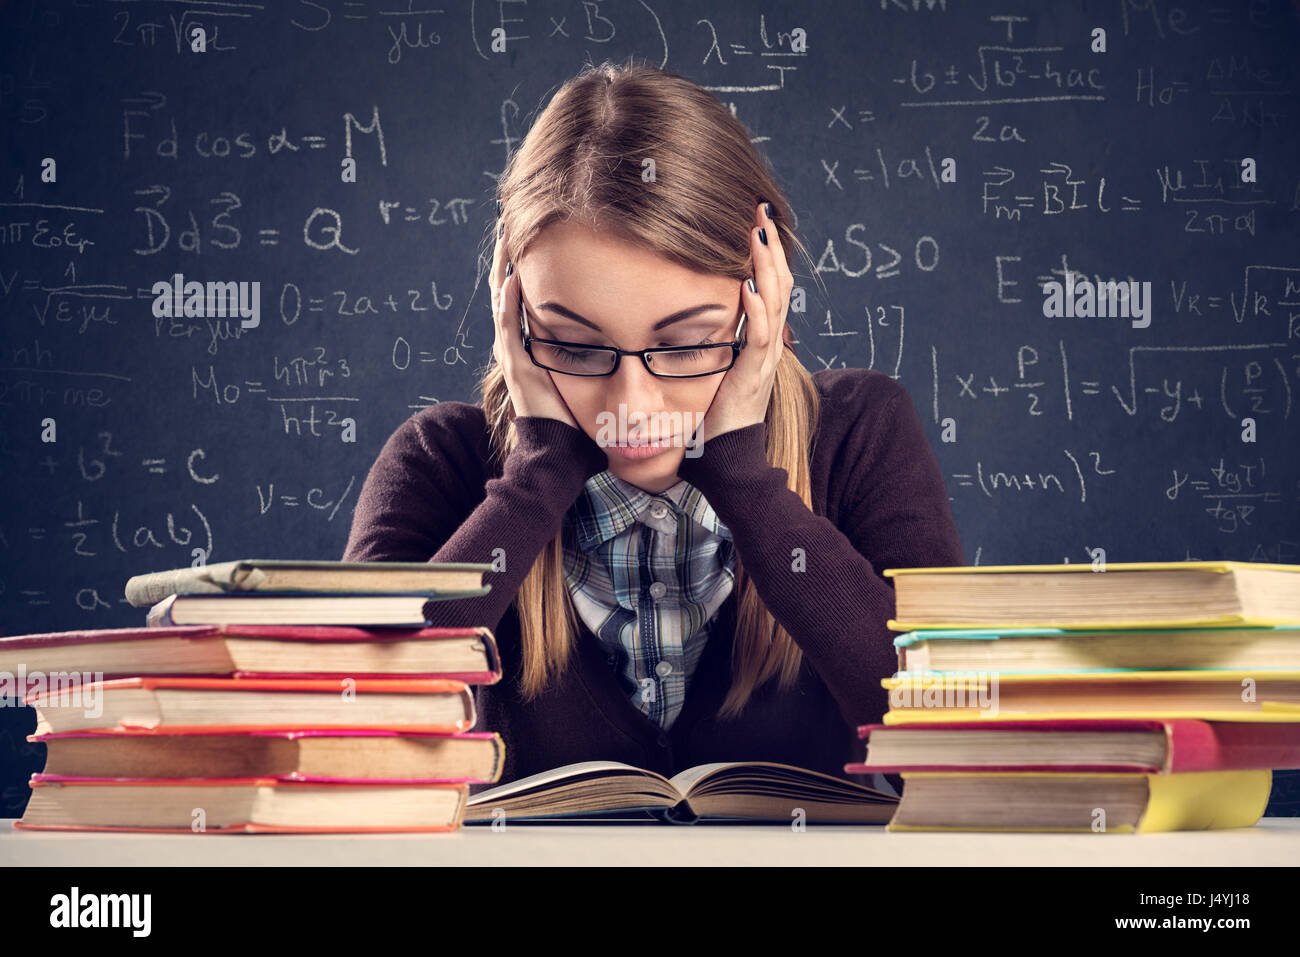 Young student with desperate expression sitting at a desk and looking at her books Stock Photo